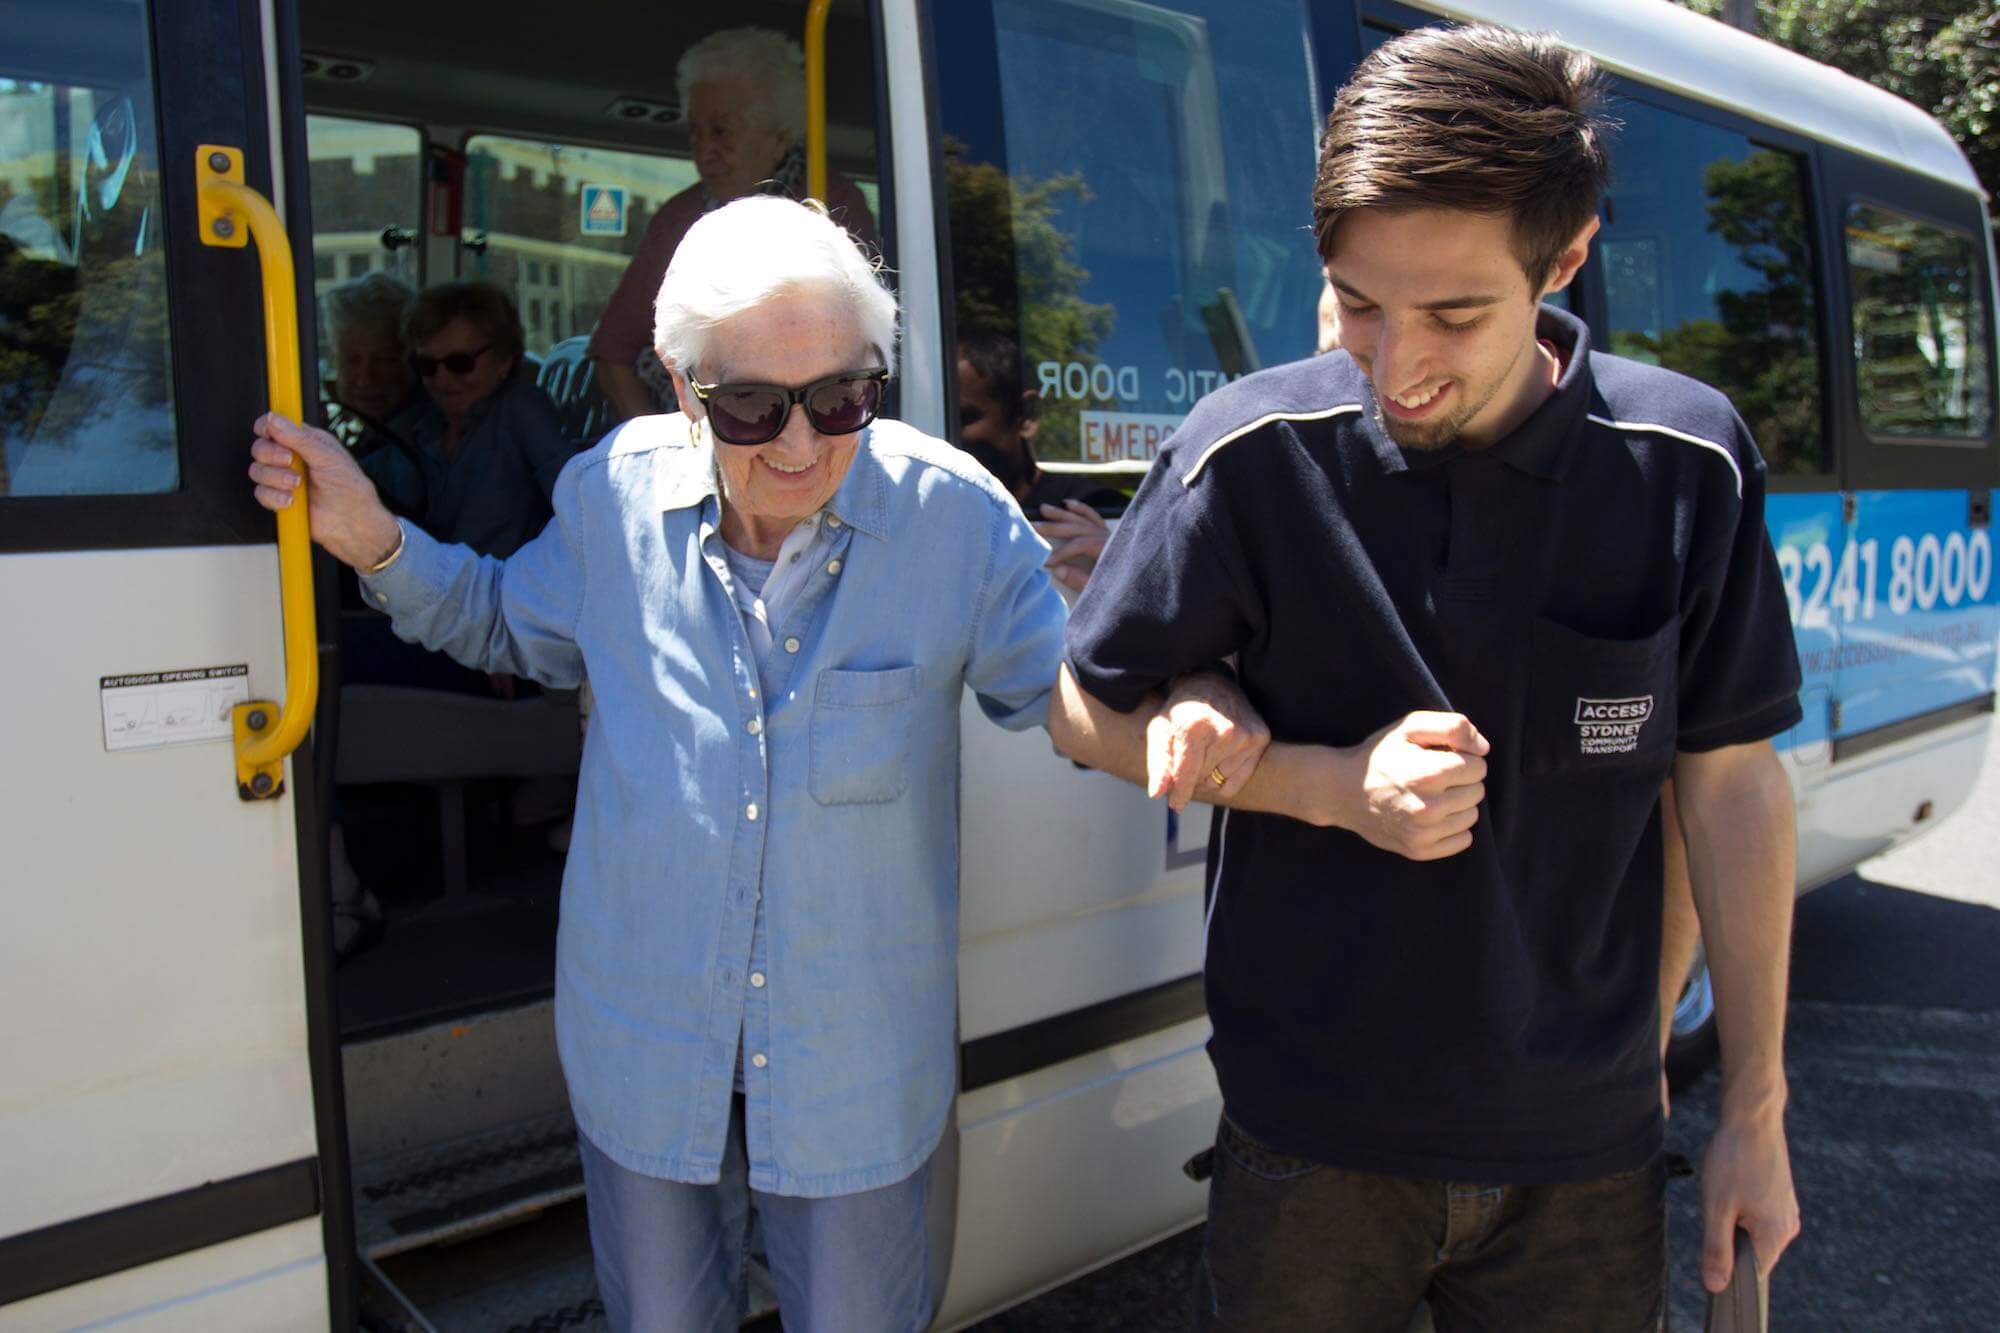 Bus assistant with elderly passenger